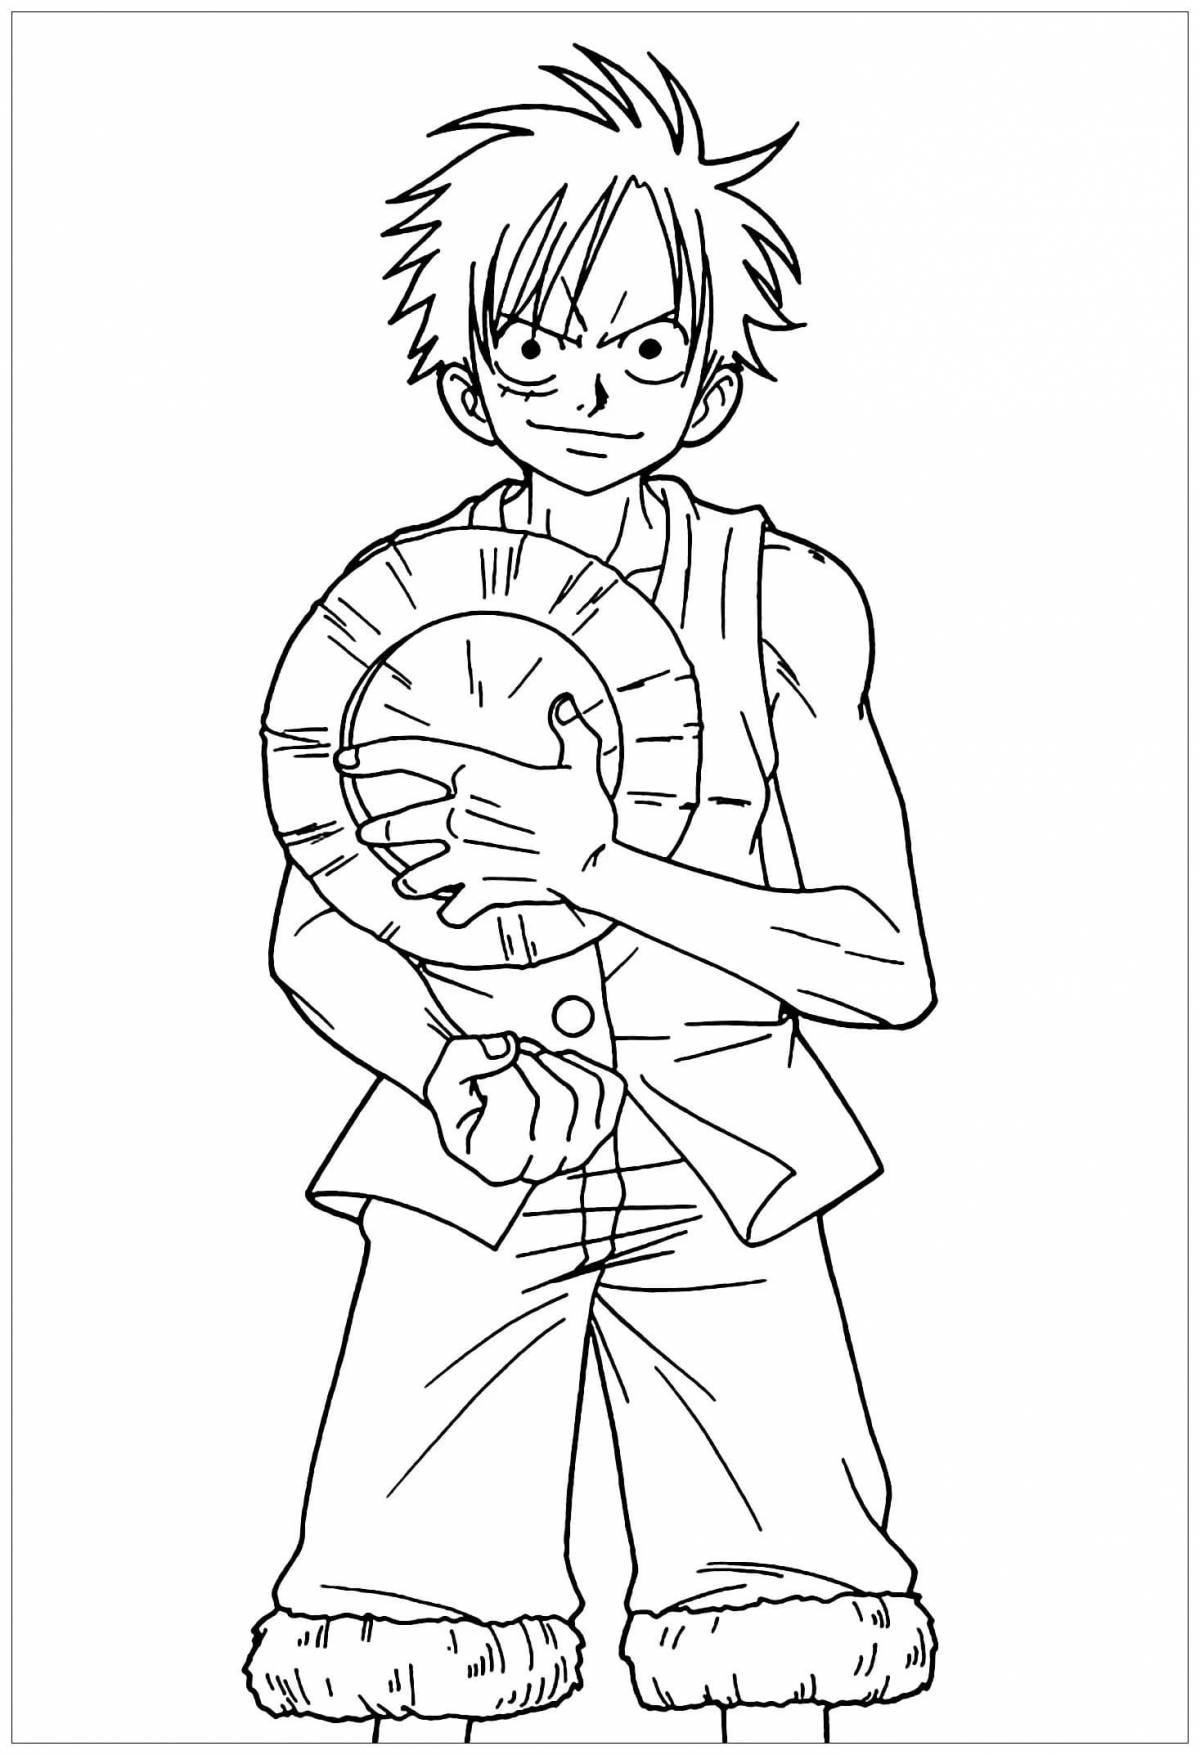 One piece live coloring page